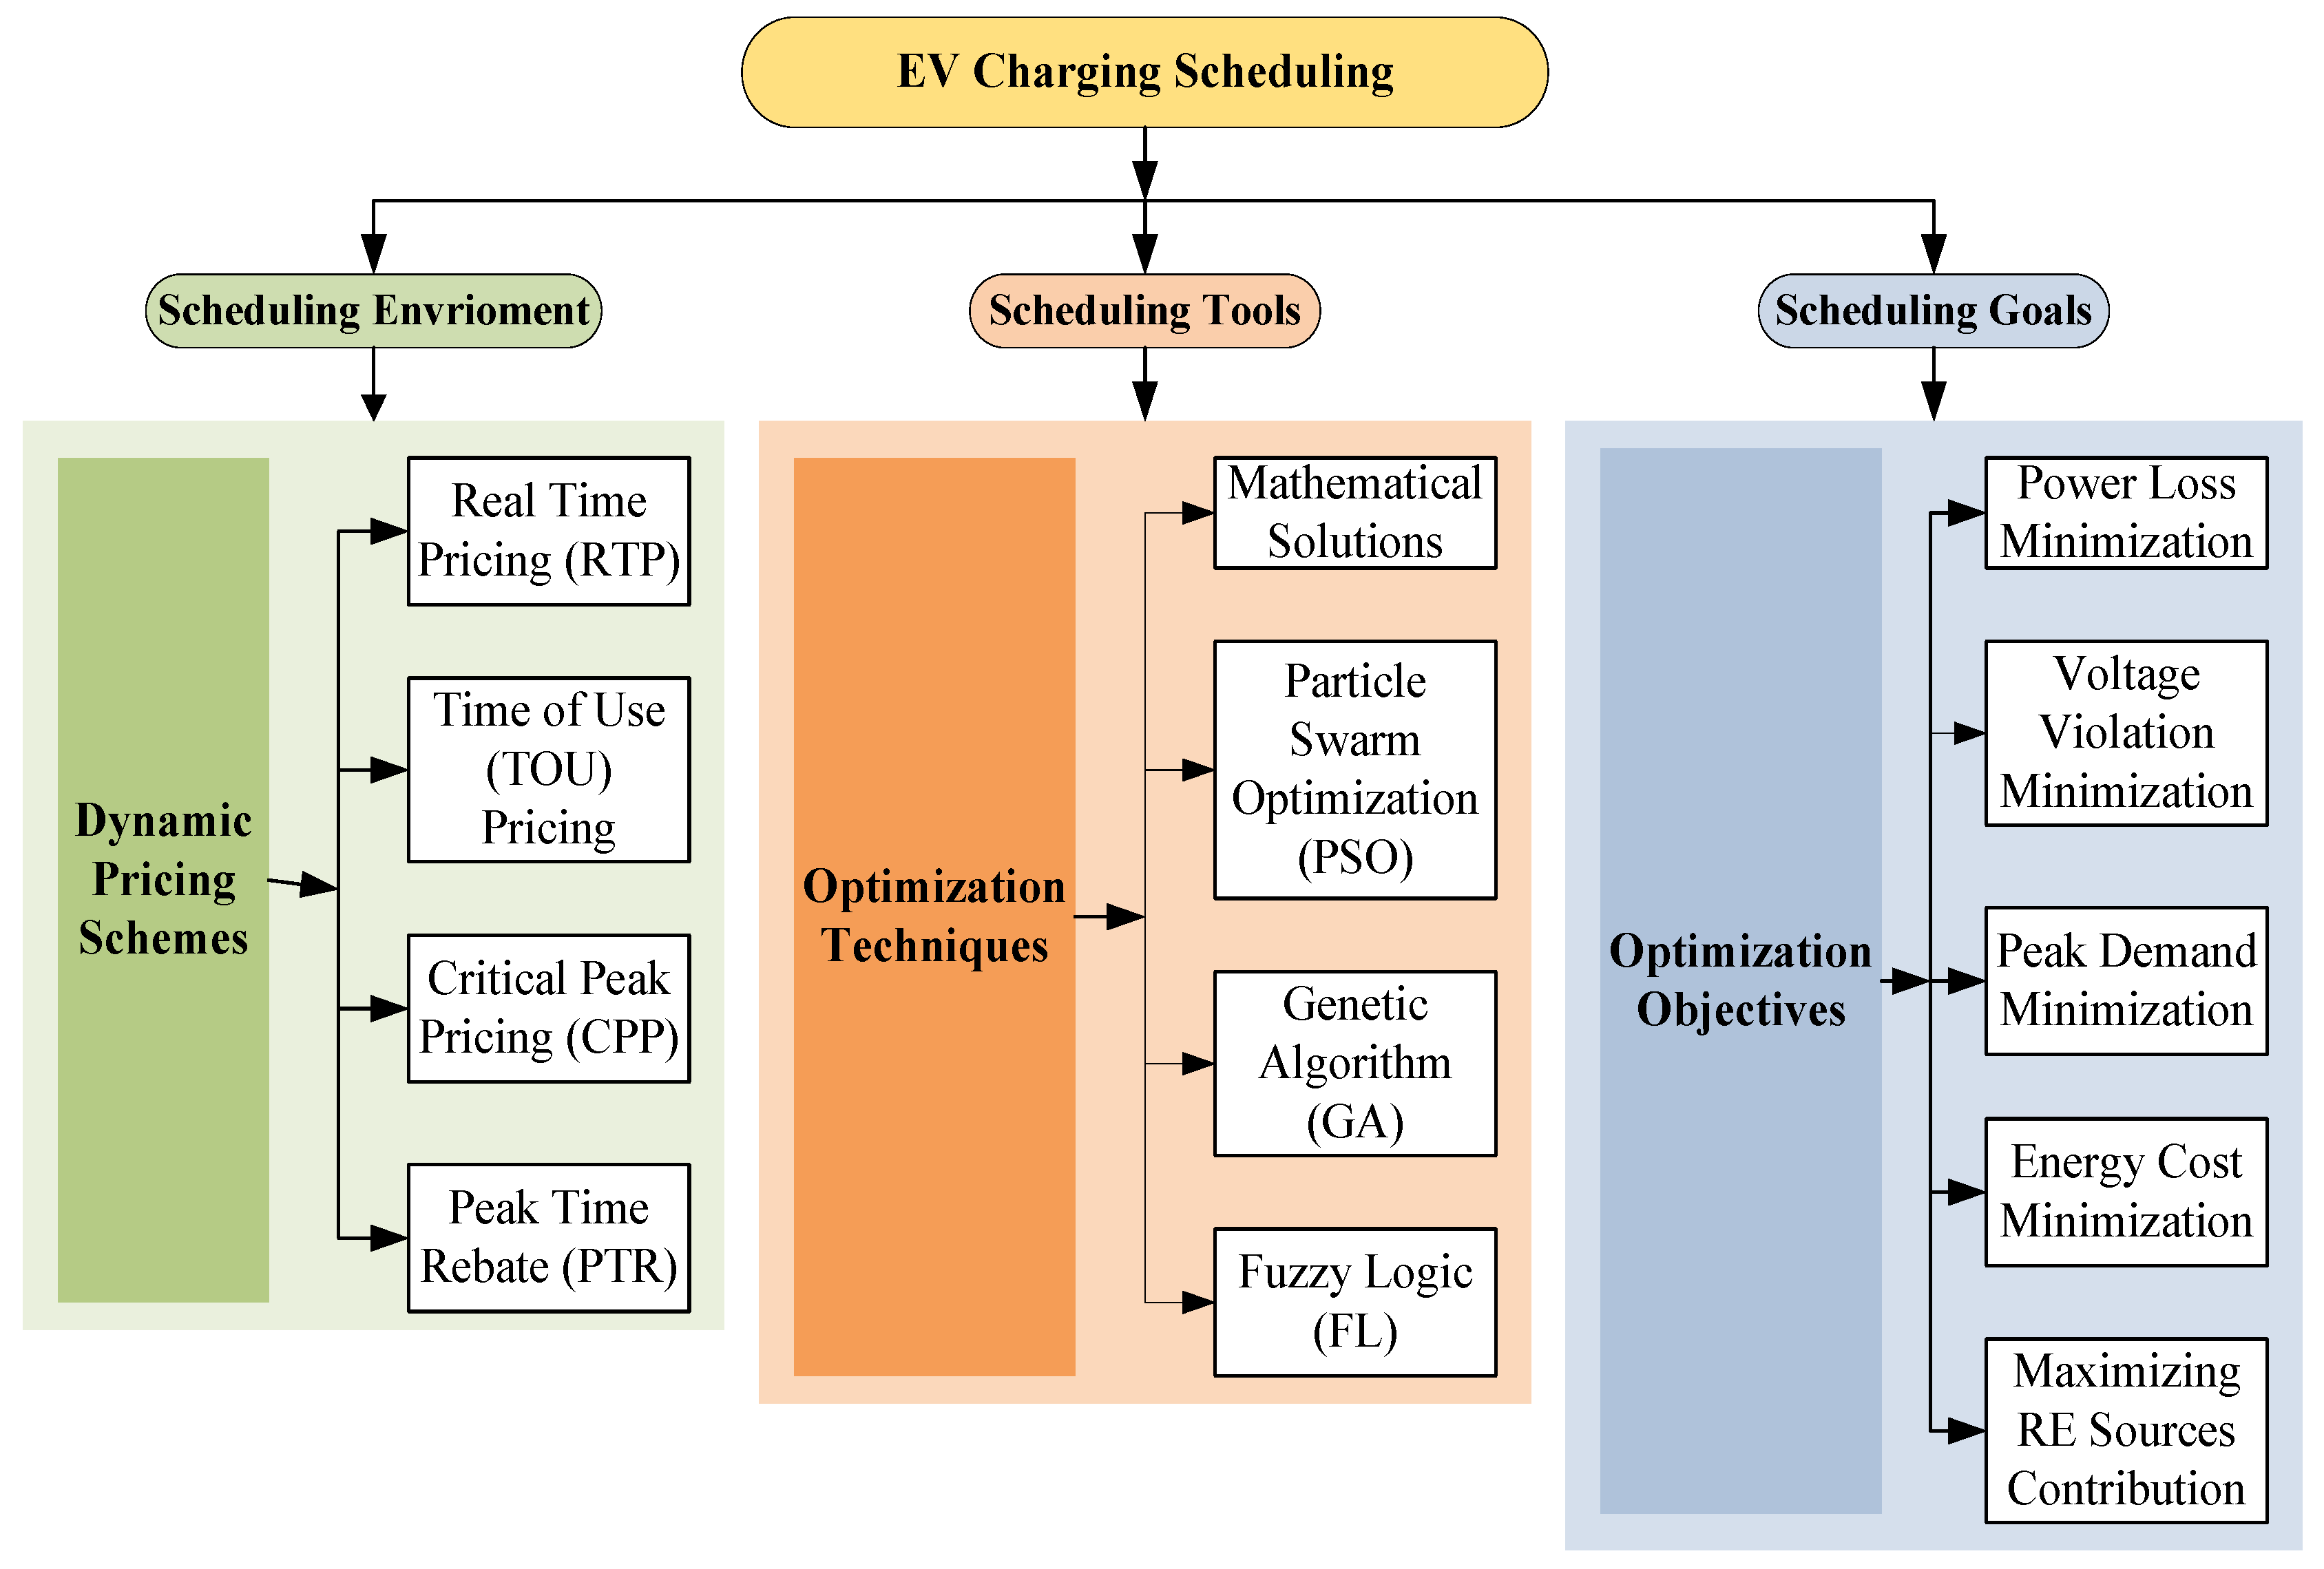 https://pub.mdpi-res.com/sustainability/sustainability-12-10160/article_deploy/html/images/sustainability-12-10160-g001.png?1607211530